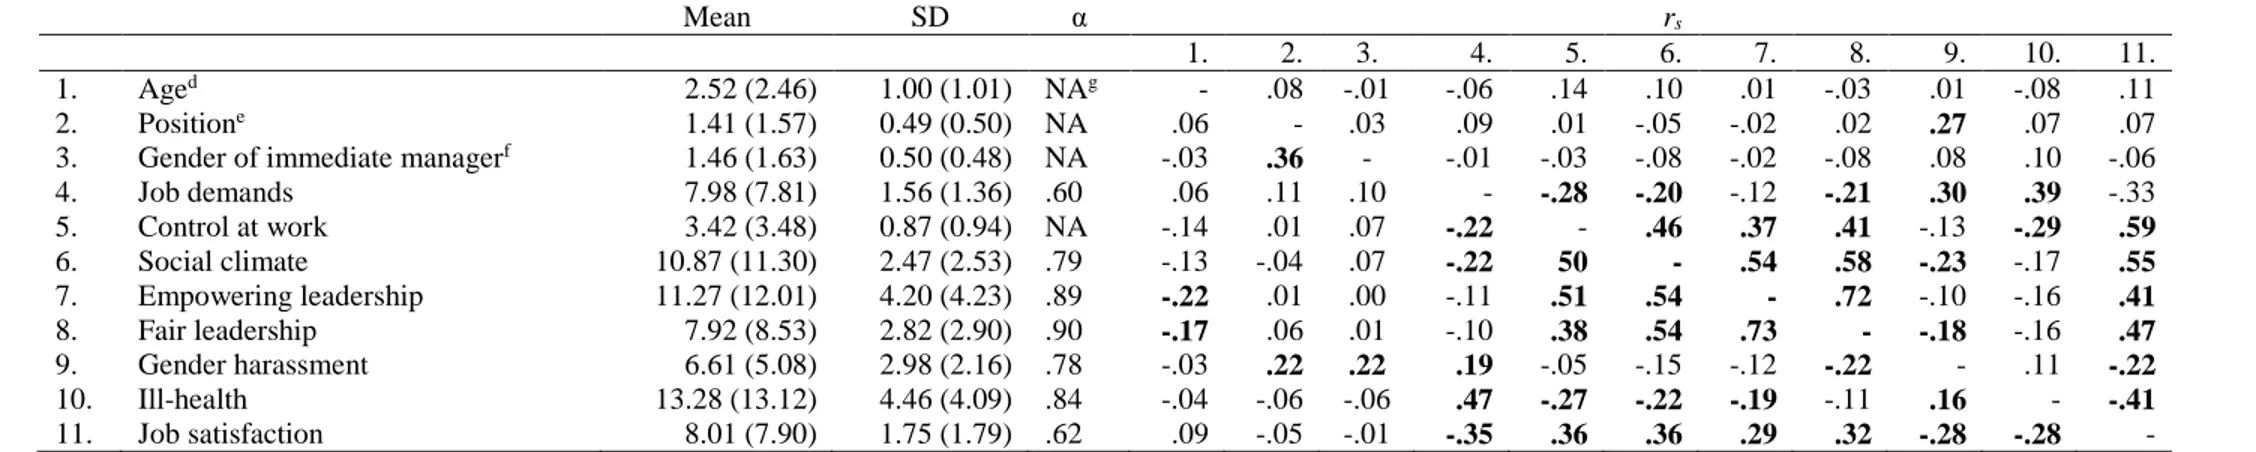 Table III. Means, standard deviations, Cronbach’s alphas and Spearman correlations for the study variables a,b,c